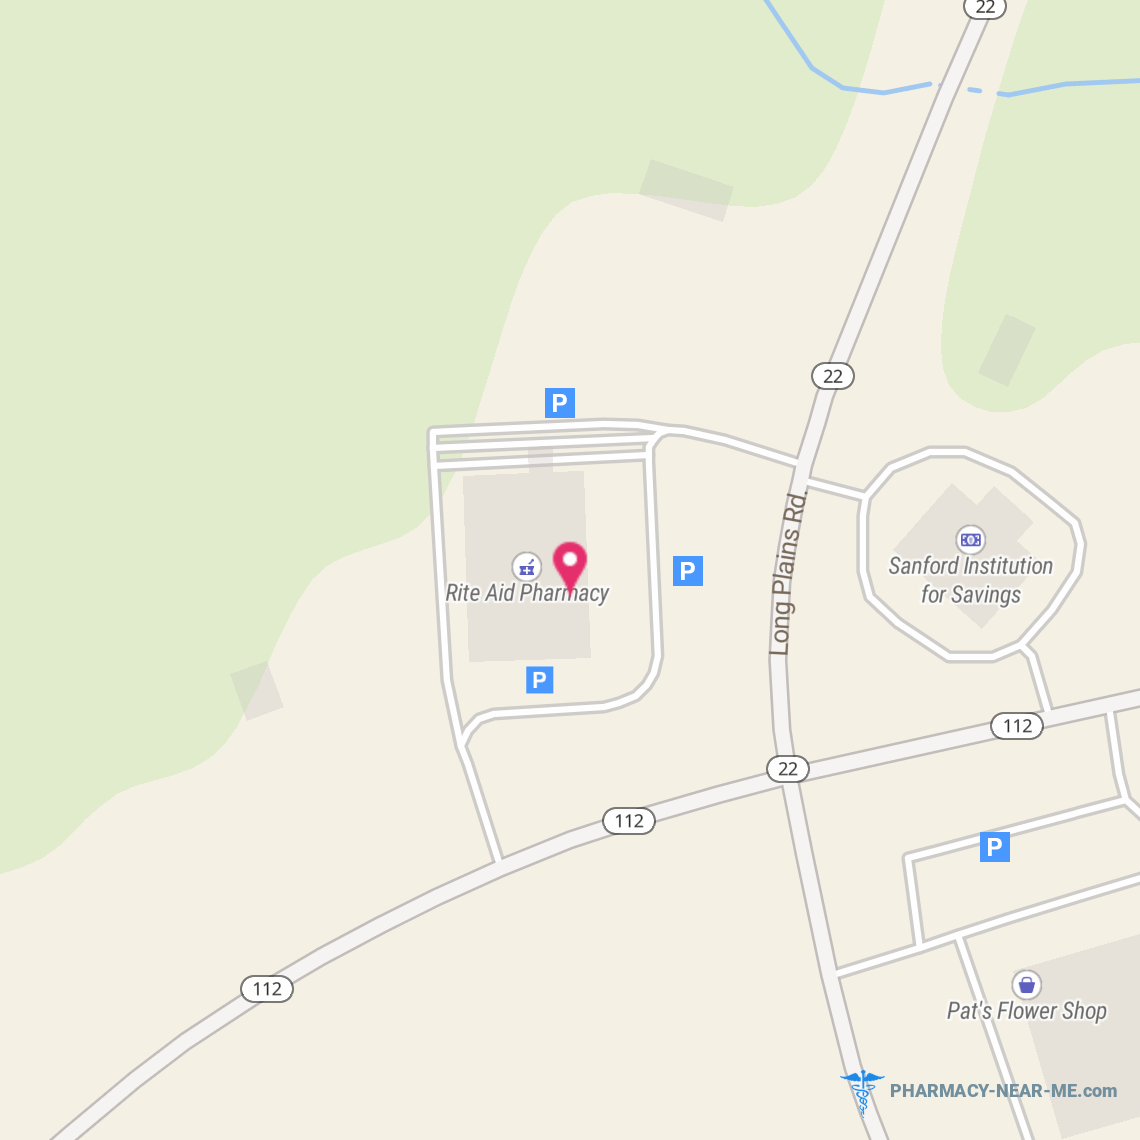 WALGREENS #17450 - Pharmacy Hours, Phone, Reviews & Information: 226 Parker Farm Road, Buxton, Maine 04093, United States